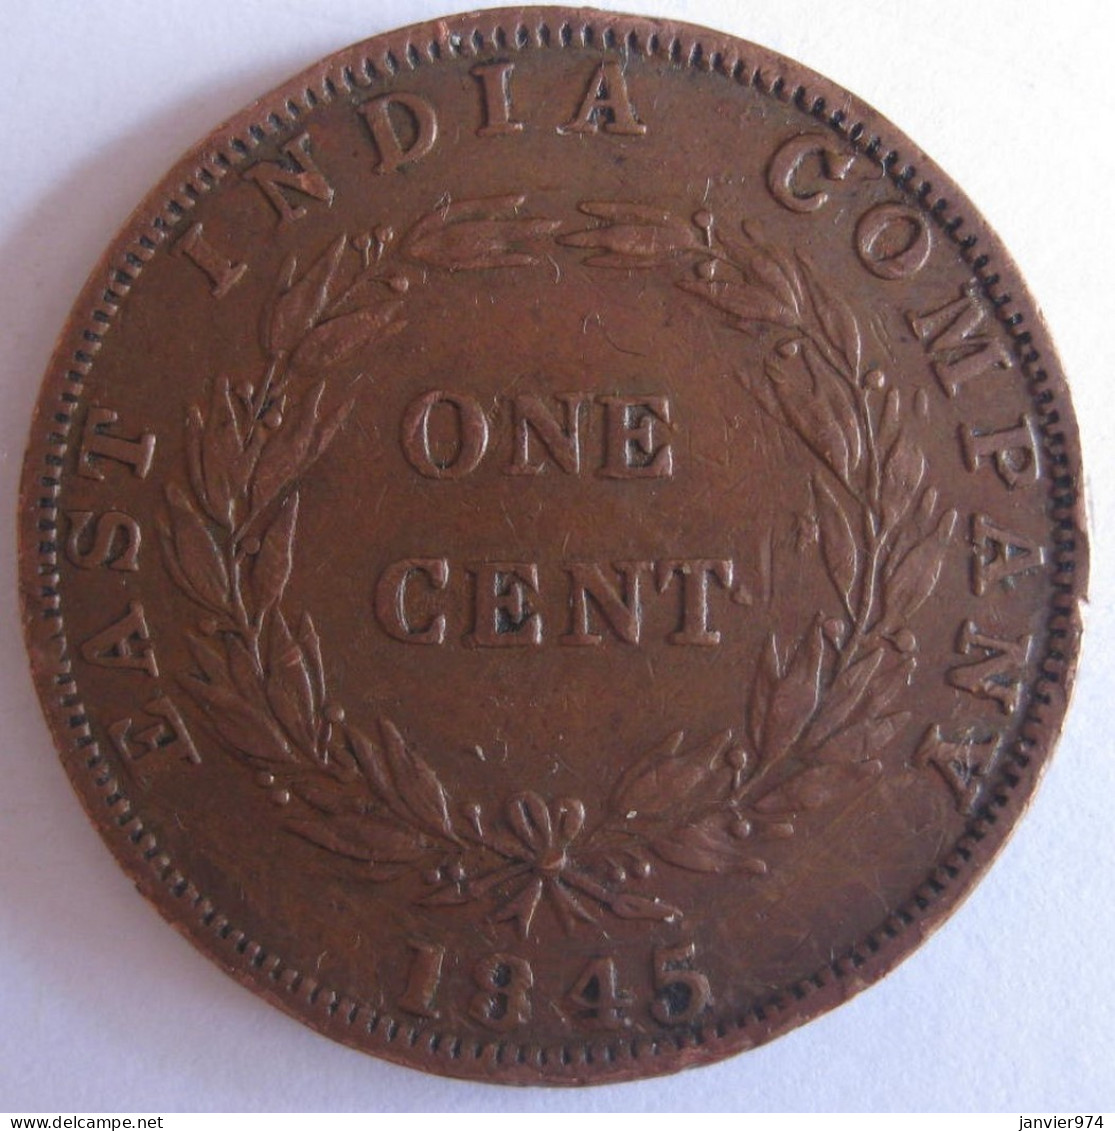 East India Company One Cent 1845. Victoria. Straits Settlements. KM# 3 - Malaysia